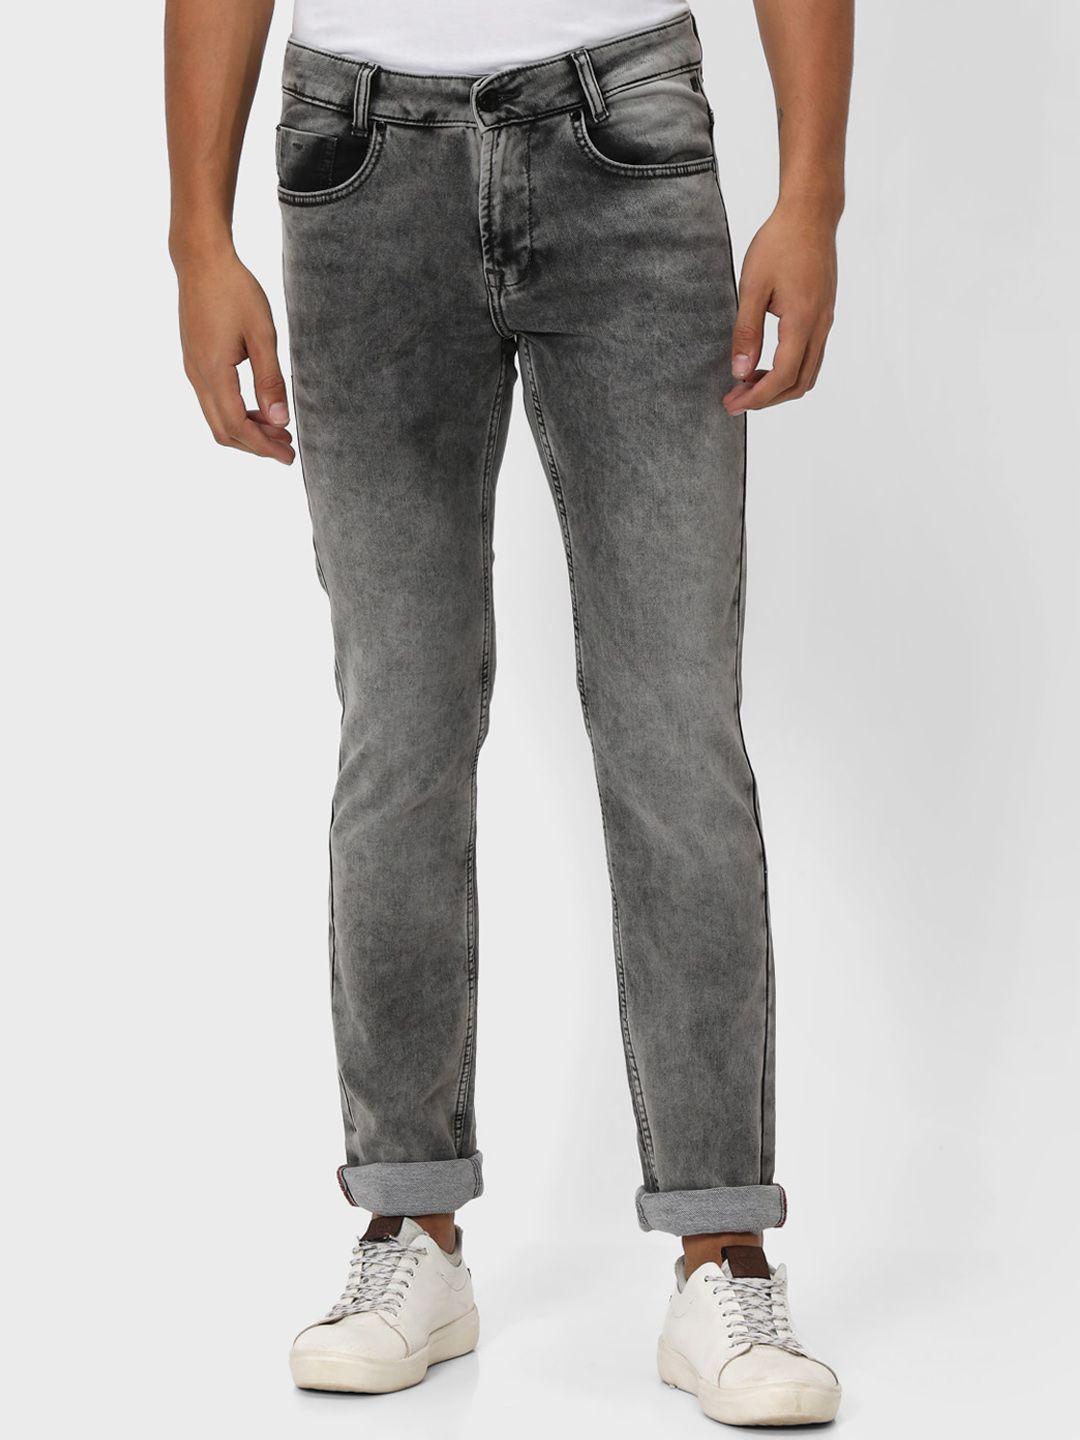 mufti-men-slim-fit-heavy-fade-stretchable-clean-look-jeans